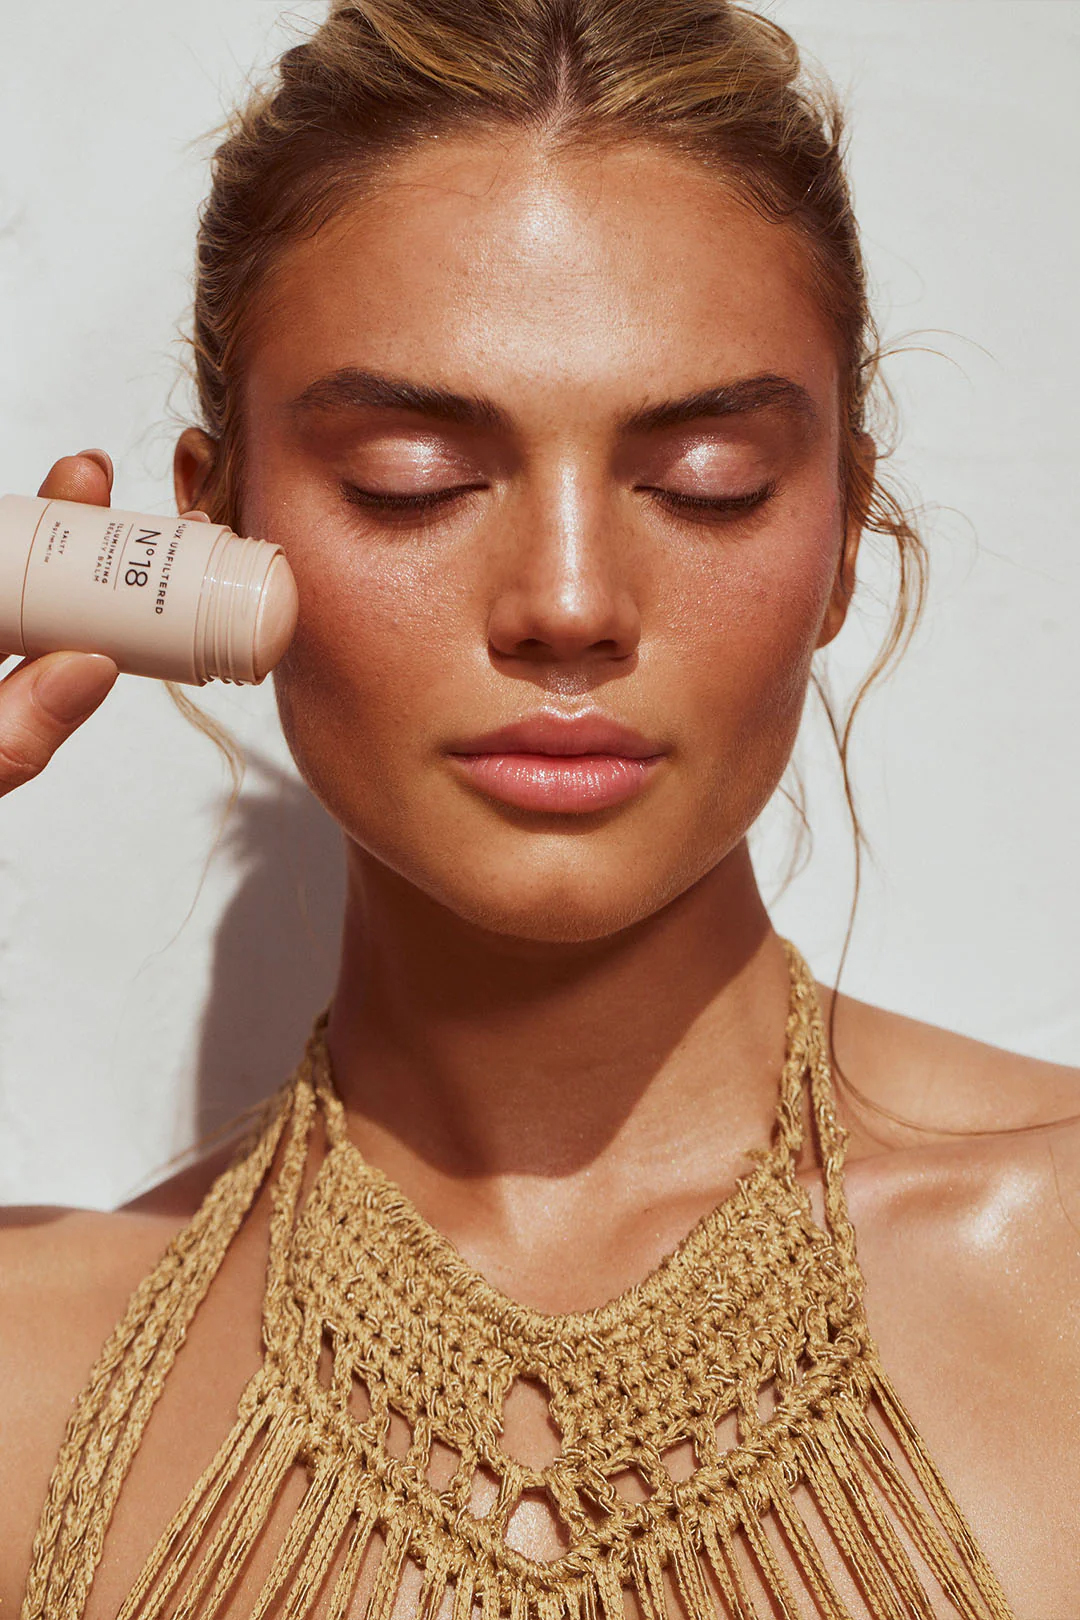 A model holds a Lux Unfiltered illuminating stick to her cheek.